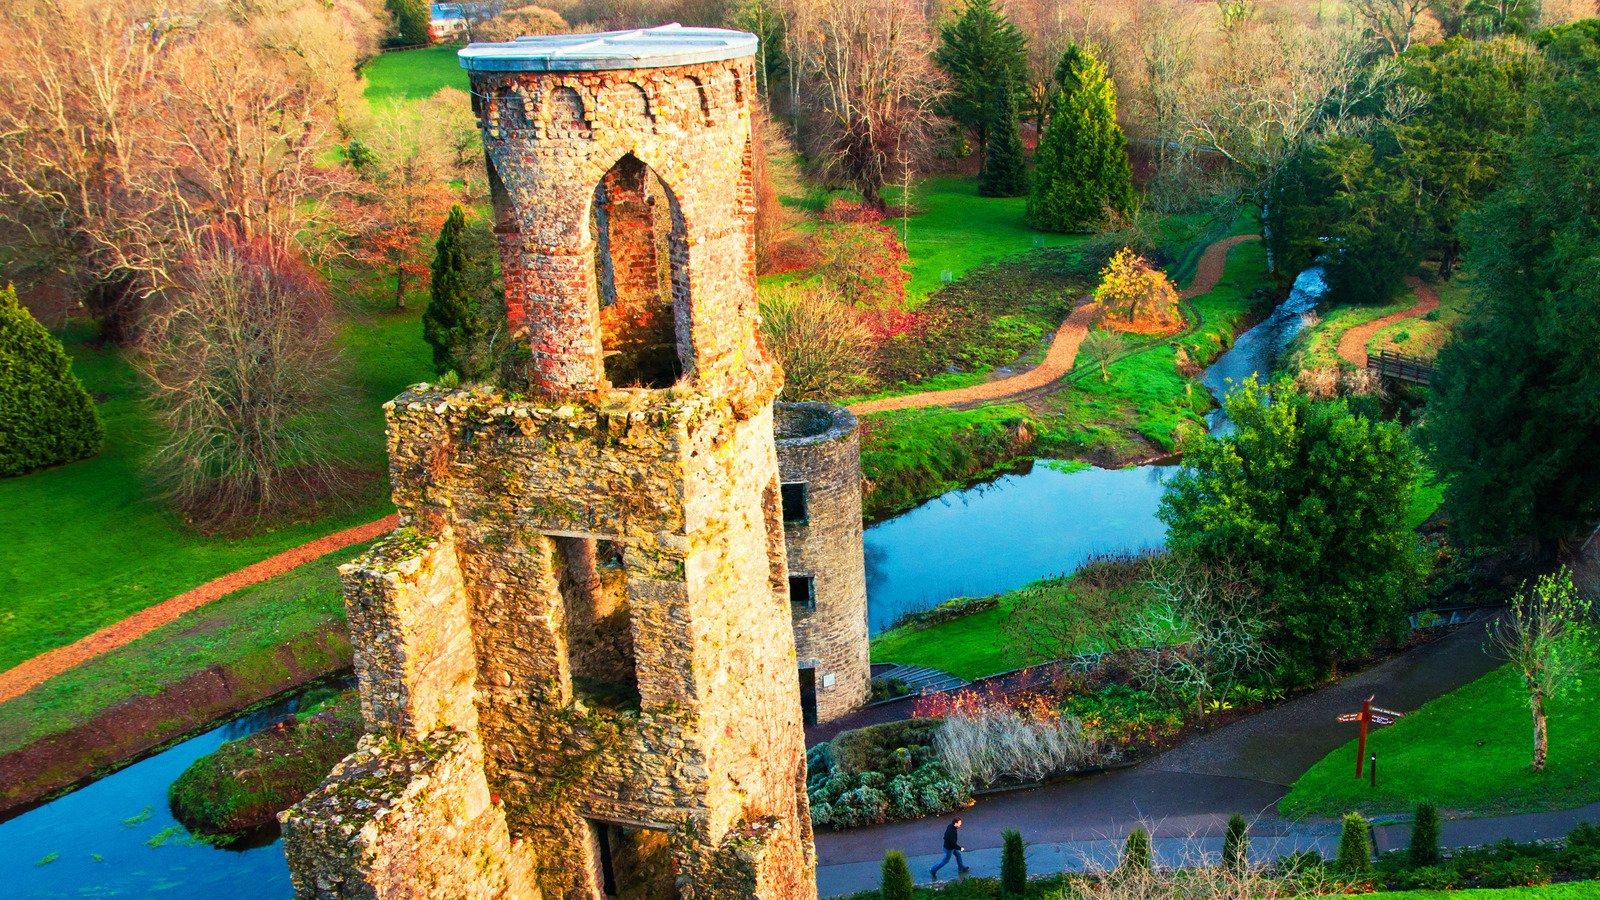 What You Need To Know Before Visiting The Legendary Blarney Stone In Ireland - Explore